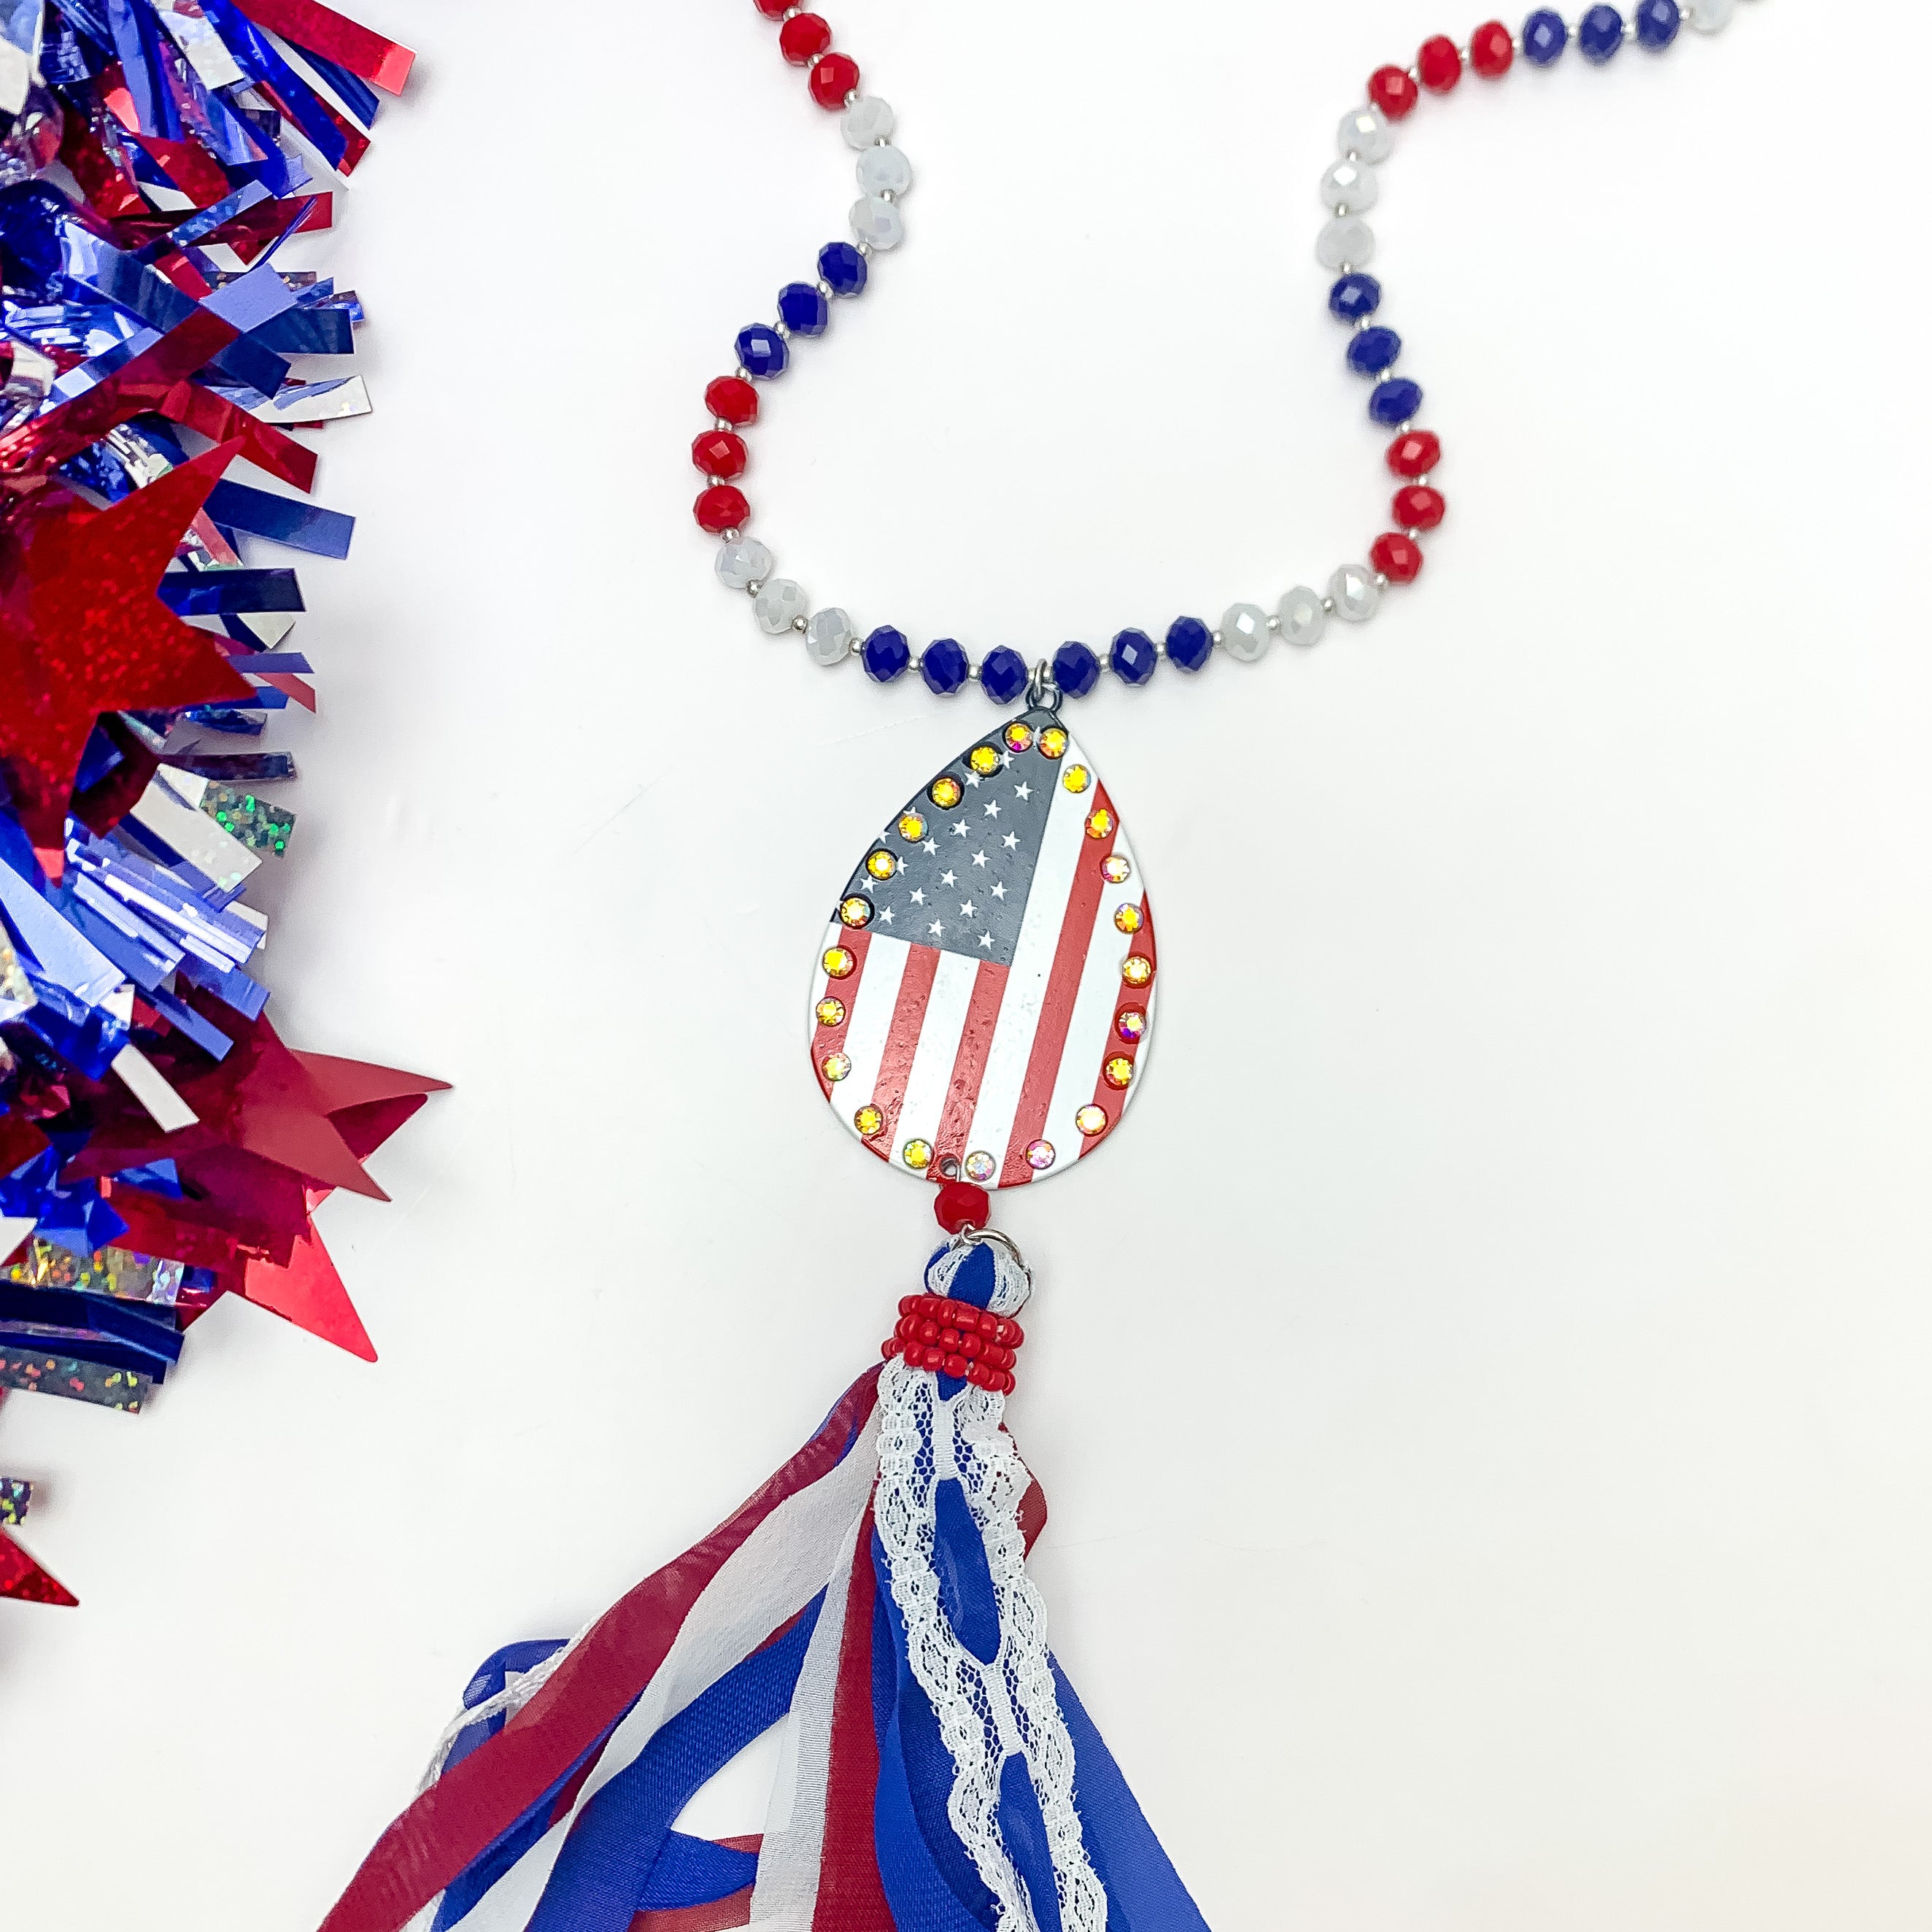 Red White and Bold USA Flag Necklace with Tassels. Pictured on a white background with red white and blue decoration on the left.